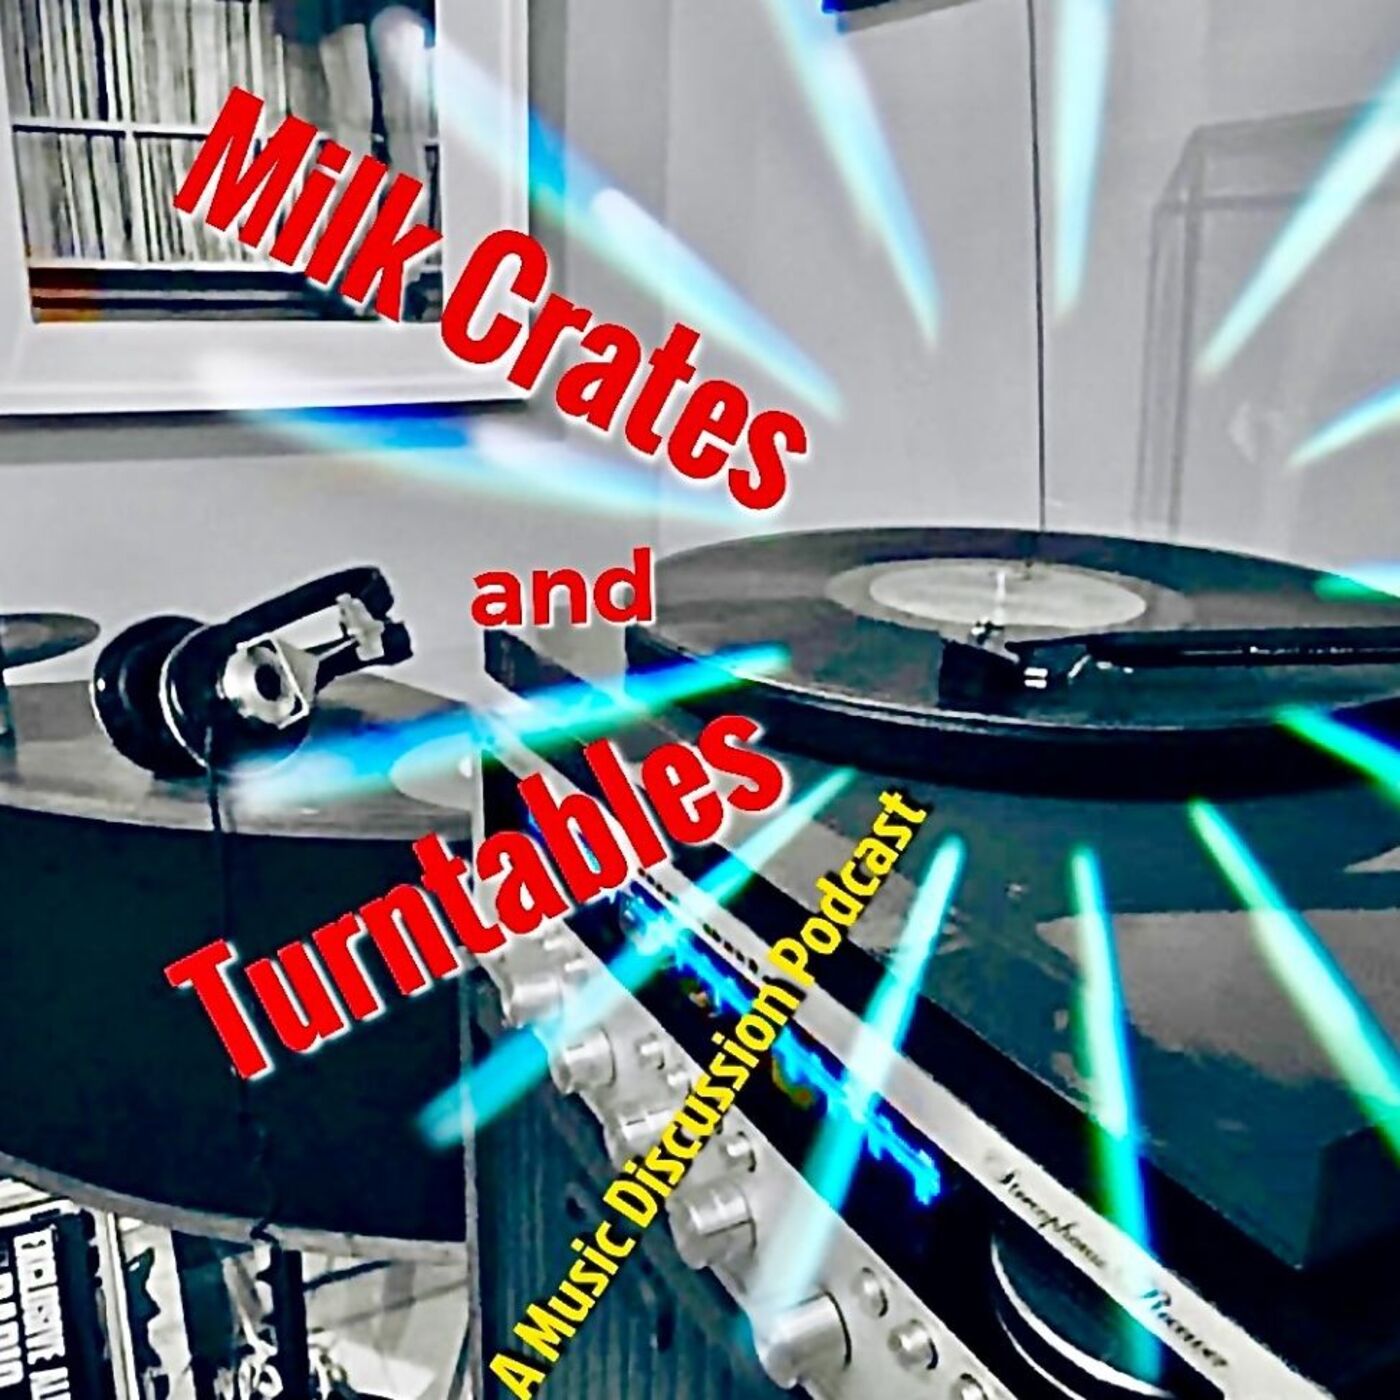 Fresh update on "jordan" discussed on Milk Crates and Turntables. A Music Discussion Podcast